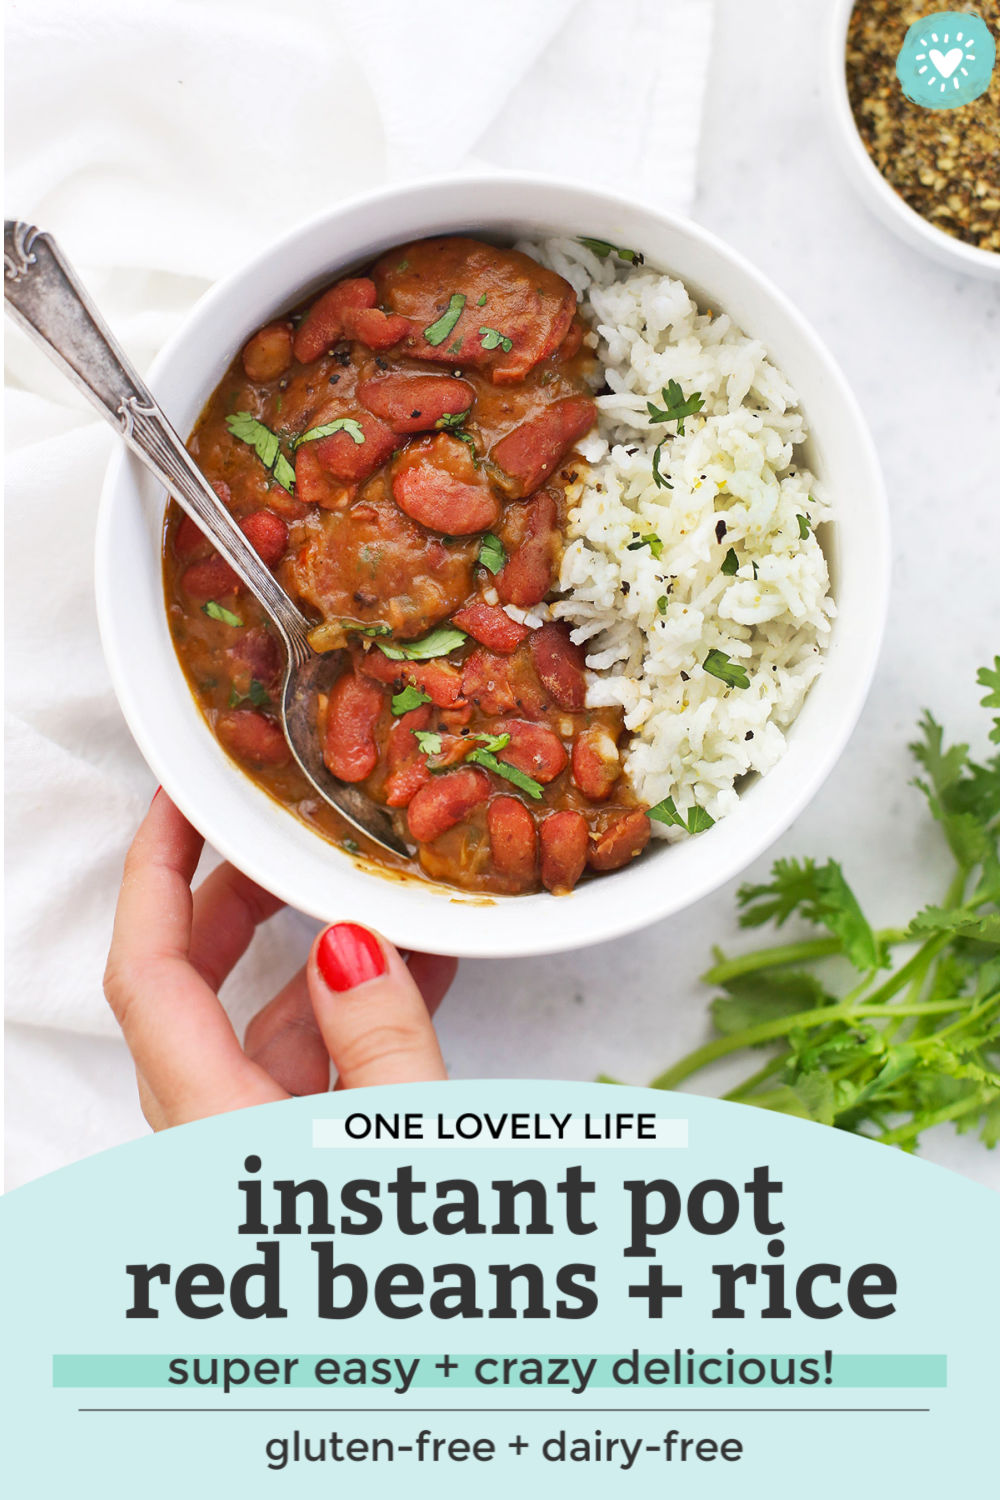 Serving Instant Pot Red Beans and Rice in a bowl garnished with fresh herbs with text overlay that reads "One Lovely Life Instant Pot Red Beans + Rice. Super Easy + Crazy Delicious! Gluten-free + dairy-free"